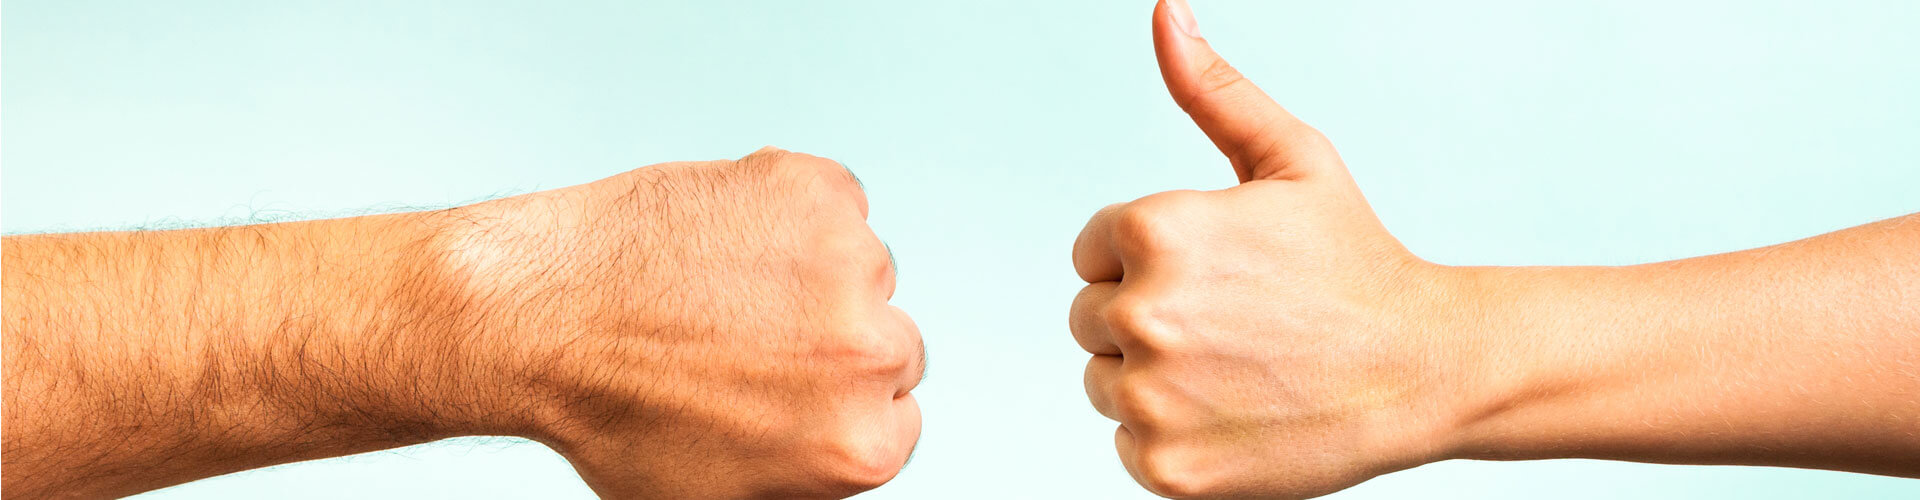 5 Ways to Deal with Negative Feedback on Social Media